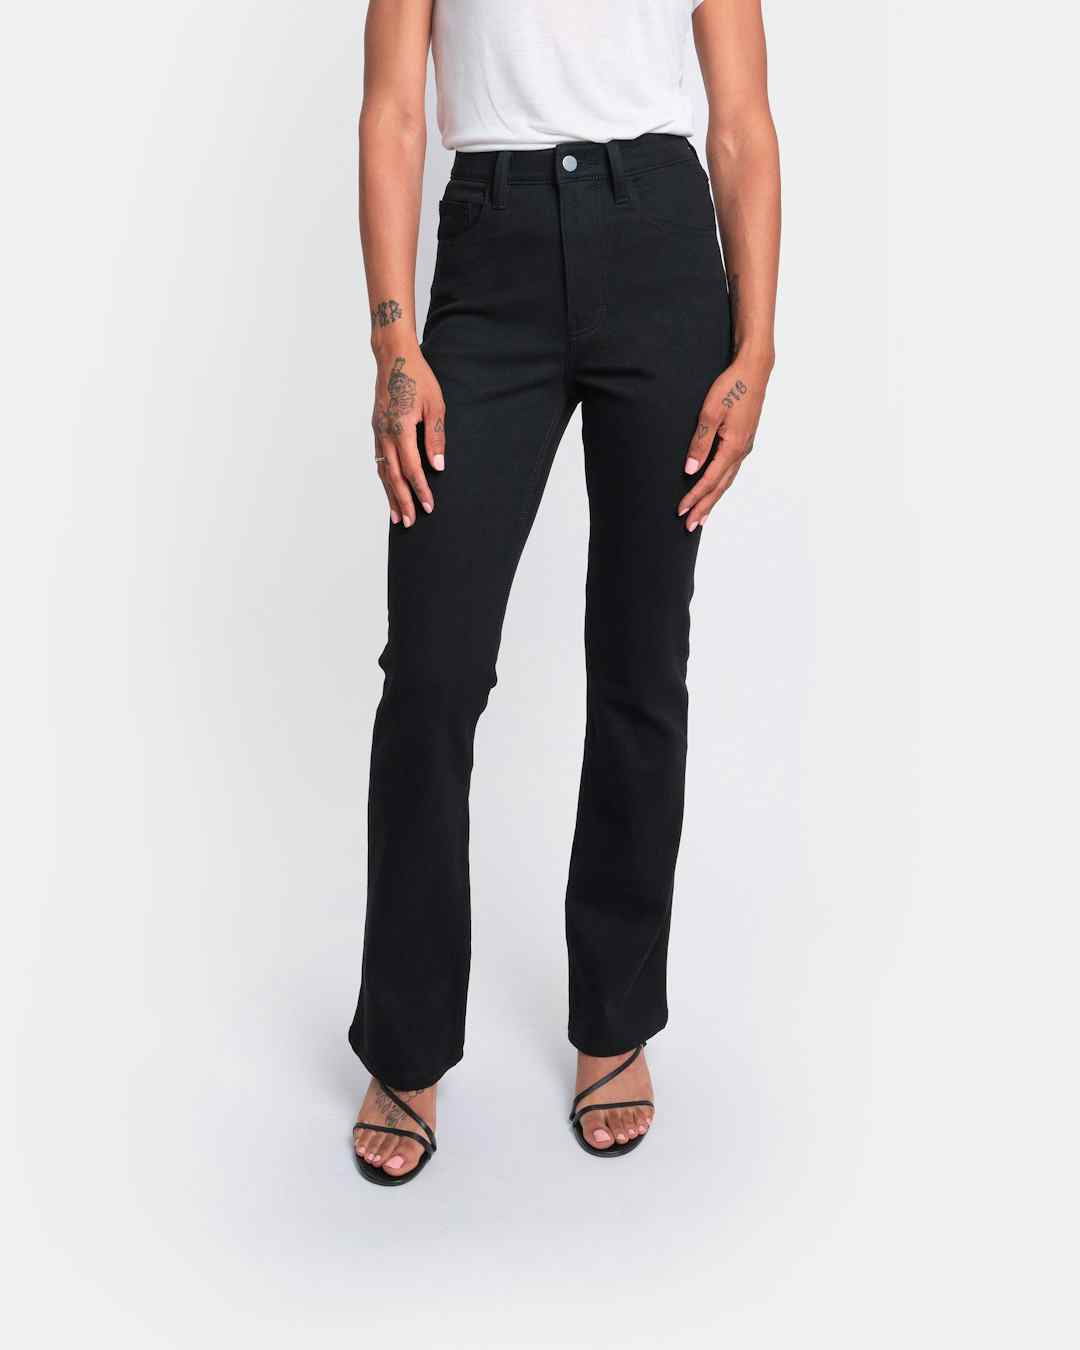 Bootcut jeans in graphite black